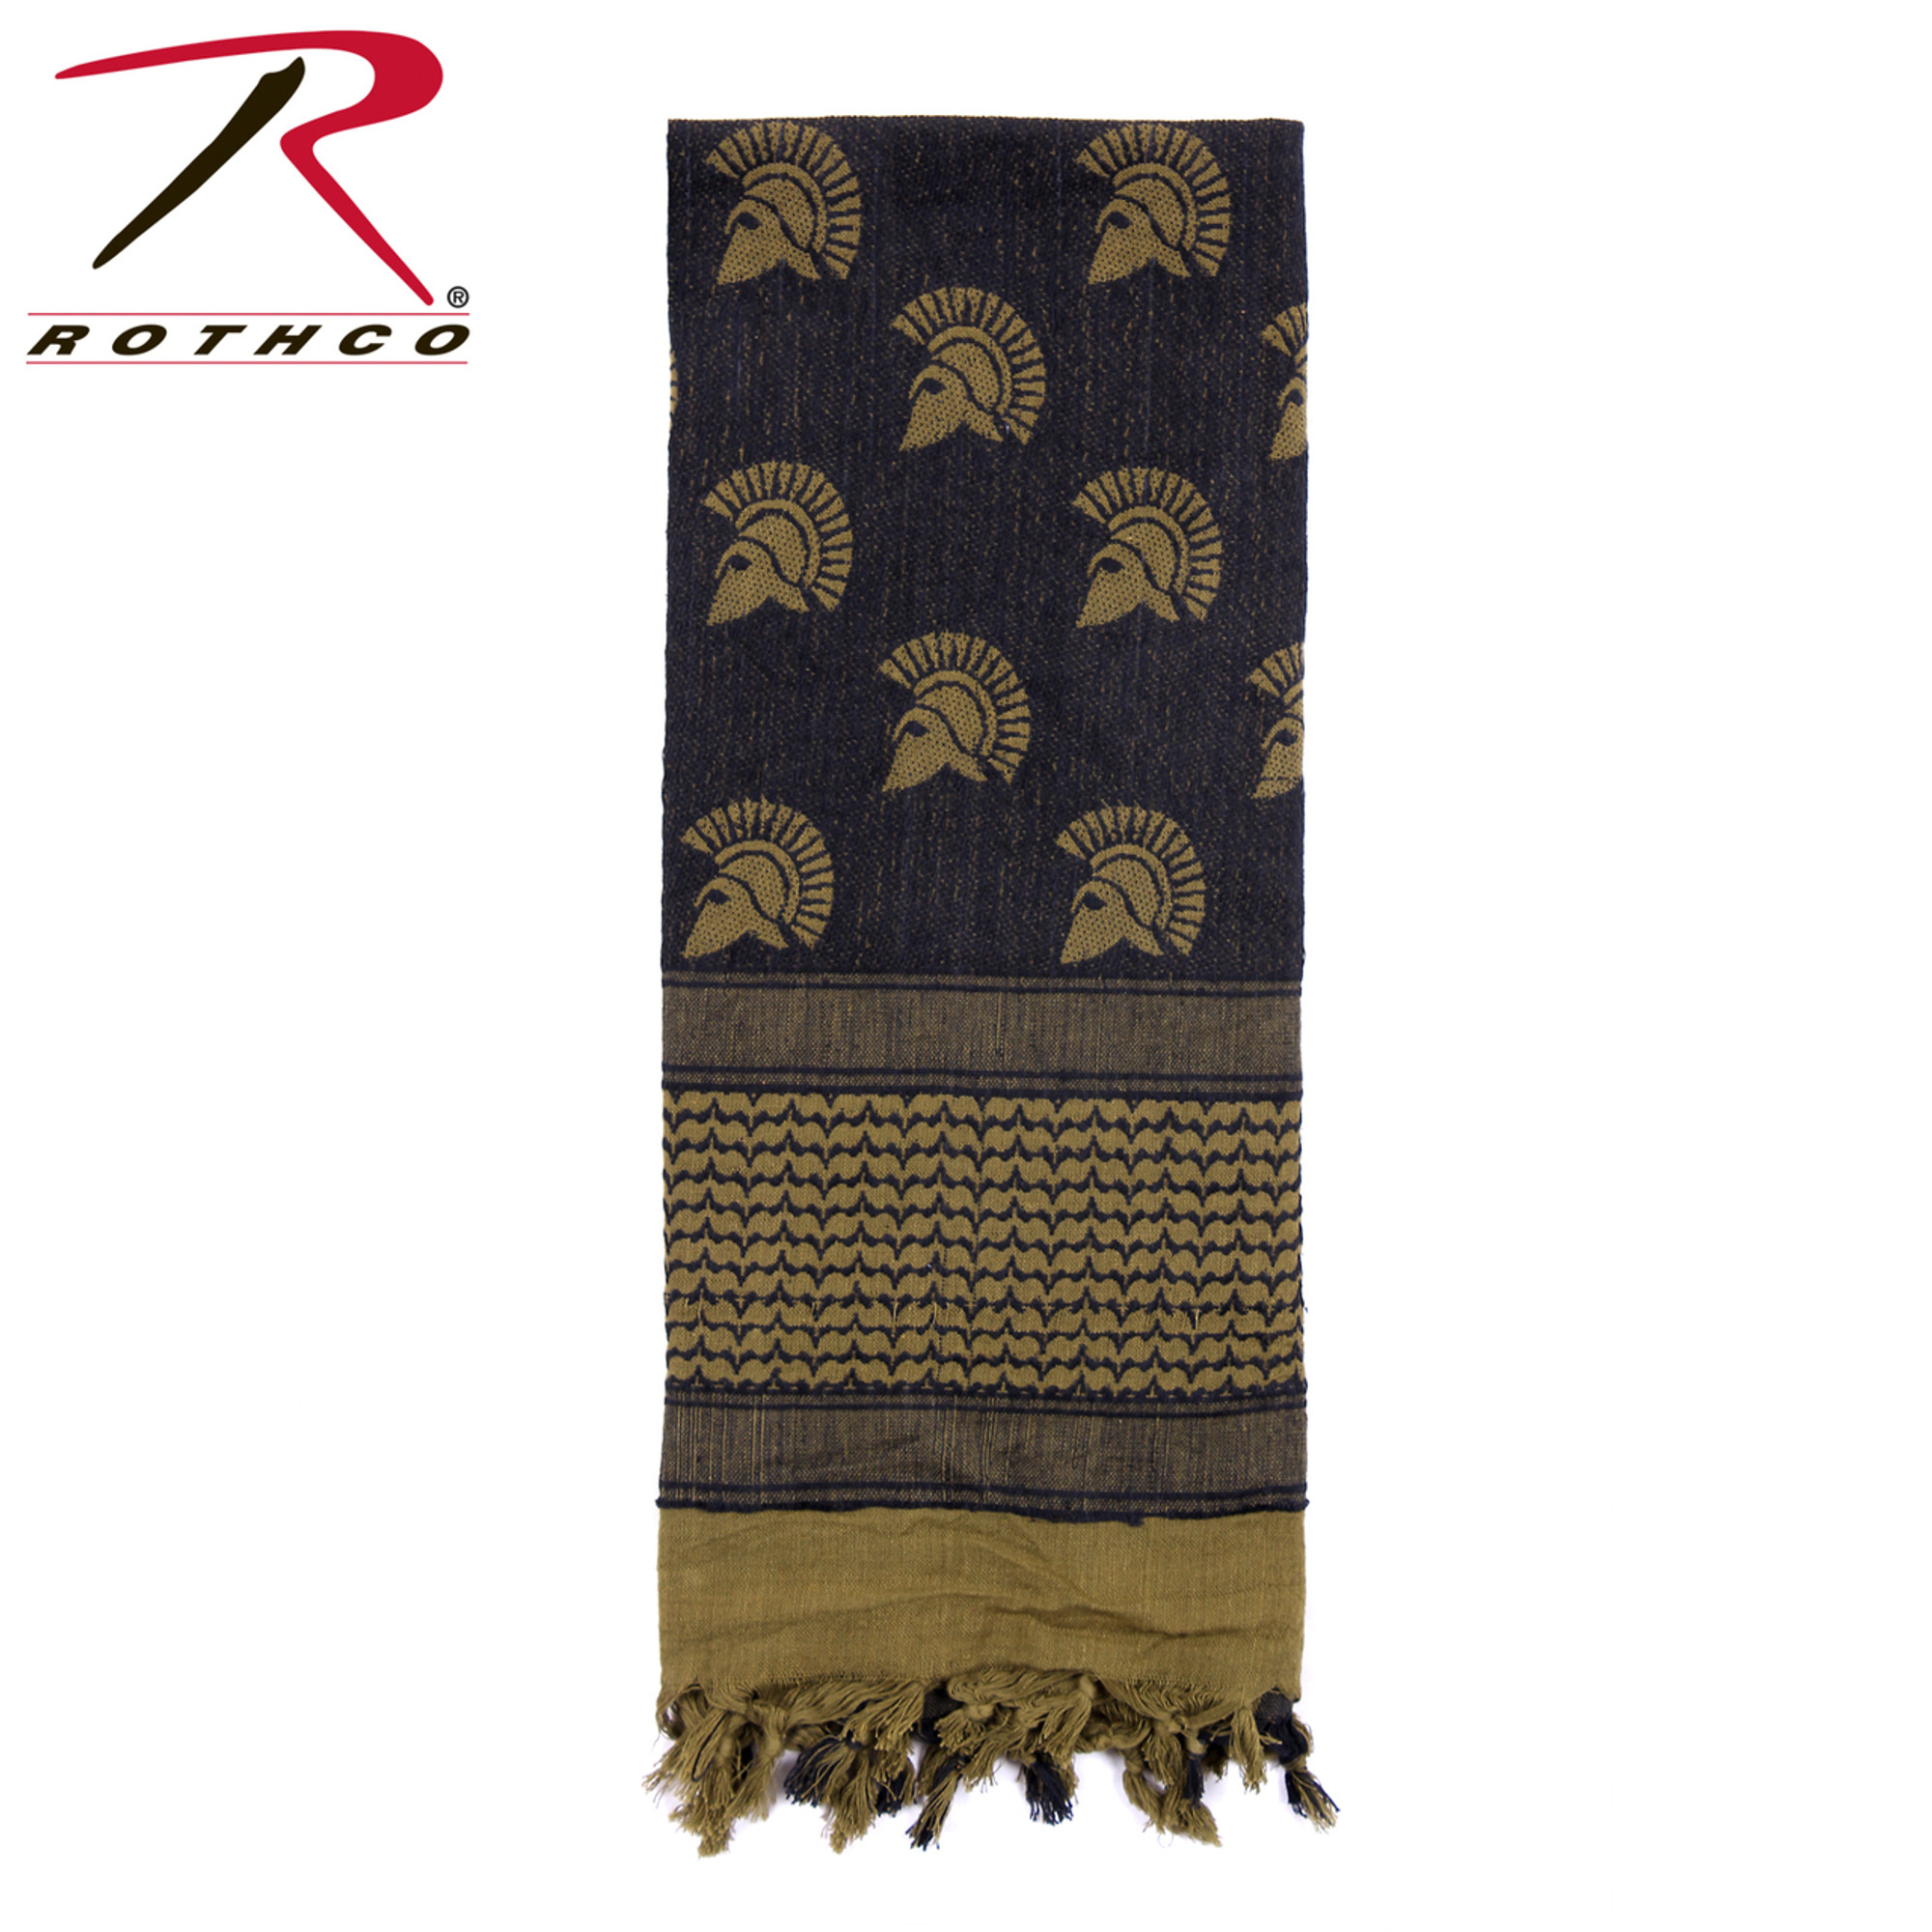 Rothco Spartan Shemagh Tactical Desert Keffiyeh Scarf - Olive Drab